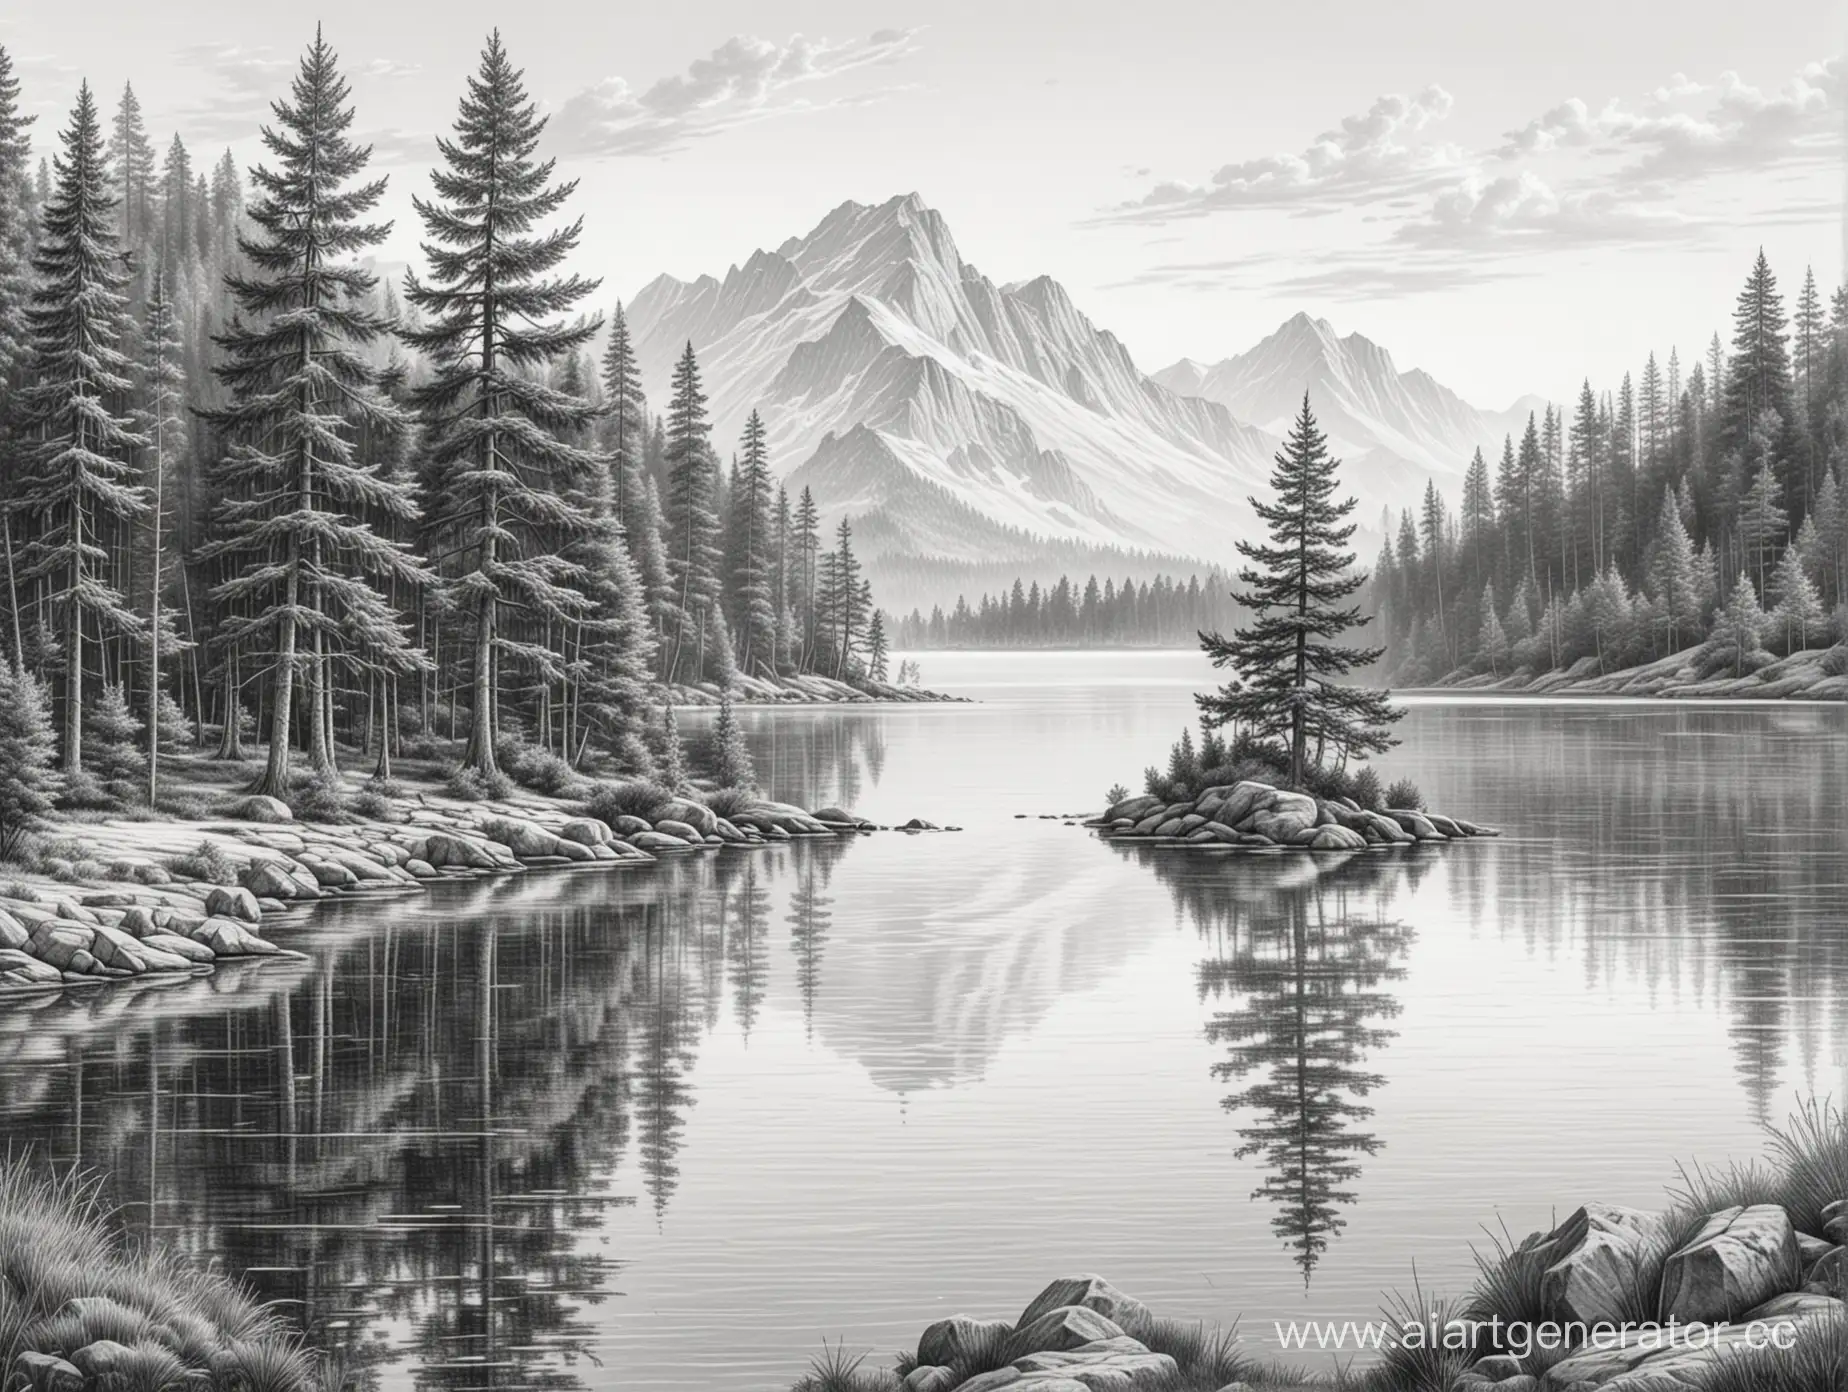 Detailed-Pencil-Graphics-of-a-Fir-Tree-by-a-Lake-with-Distant-Island